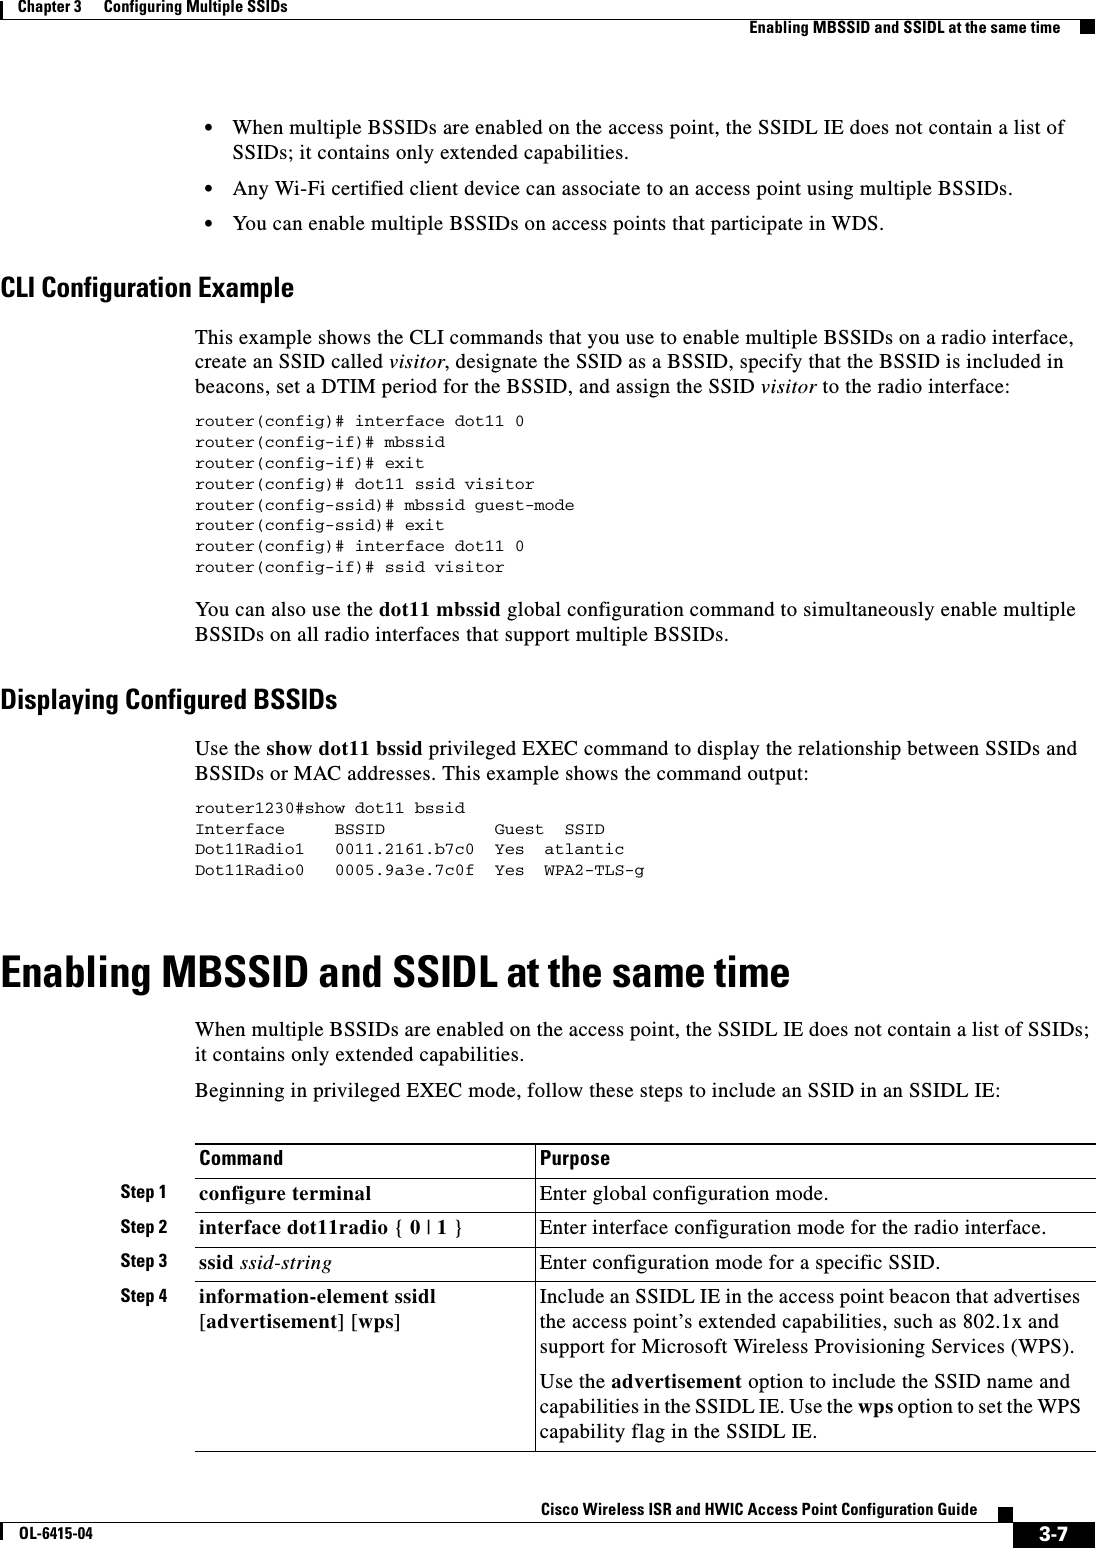  3-7Cisco Wireless ISR and HWIC Access Point Configuration GuideOL-6415-04Chapter 3      Configuring Multiple SSIDs  Enabling MBSSID and SSIDL at the same time  • When multiple BSSIDs are enabled on the access point, the SSIDL IE does not contain a list of SSIDs; it contains only extended capabilities.  • Any Wi-Fi certified client device can associate to an access point using multiple BSSIDs.  • You can enable multiple BSSIDs on access points that participate in WDS.CLI Configuration ExampleThis example shows the CLI commands that you use to enable multiple BSSIDs on a radio interface, create an SSID called visitor, designate the SSID as a BSSID, specify that the BSSID is included in beacons, set a DTIM period for the BSSID, and assign the SSID visitor to the radio interface: router(config)# interface dot11 0router(config-if)# mbssidrouter(config-if)# exitrouter(config)# dot11 ssid visitorrouter(config-ssid)# mbssid guest-mode router(config-ssid)# exitrouter(config)# interface dot11 0router(config-if)# ssid visitorYou  c an  a ls o  us e   t h e   dot11 mbssid global configuration command to simultaneously enable multiple BSSIDs on all radio interfaces that support multiple BSSIDs.Displaying Configured BSSIDsUse the show dot11 bssid privileged EXEC command to display the relationship between SSIDs and BSSIDs or MAC addresses. This example shows the command output:router1230#show dot11 bssidInterface     BSSID           Guest  SSIDDot11Radio1   0011.2161.b7c0  Yes  atlanticDot11Radio0   0005.9a3e.7c0f  Yes  WPA2-TLS-gEnabling MBSSID and SSIDL at the same timeWhen multiple BSSIDs are enabled on the access point, the SSIDL IE does not contain a list of SSIDs; it contains only extended capabilities.Beginning in privileged EXEC mode, follow these steps to include an SSID in an SSIDL IE:Command PurposeStep 1 configure terminal Enter global configuration mode.Step 2 interface dot11radio { 0 | 1 }Enter interface configuration mode for the radio interface. Step 3 ssid ssid-string Enter configuration mode for a specific SSID.Step 4 information-element ssidl [advertisement] [wps]Include an SSIDL IE in the access point beacon that advertises the access point’s extended capabilities, such as 802.1x and support for Microsoft Wireless Provisioning Services (WPS).Use the advertisement option to include the SSID name and capabilities in the SSIDL IE. Use the wps option to set the WPS capability flag in the SSIDL IE.